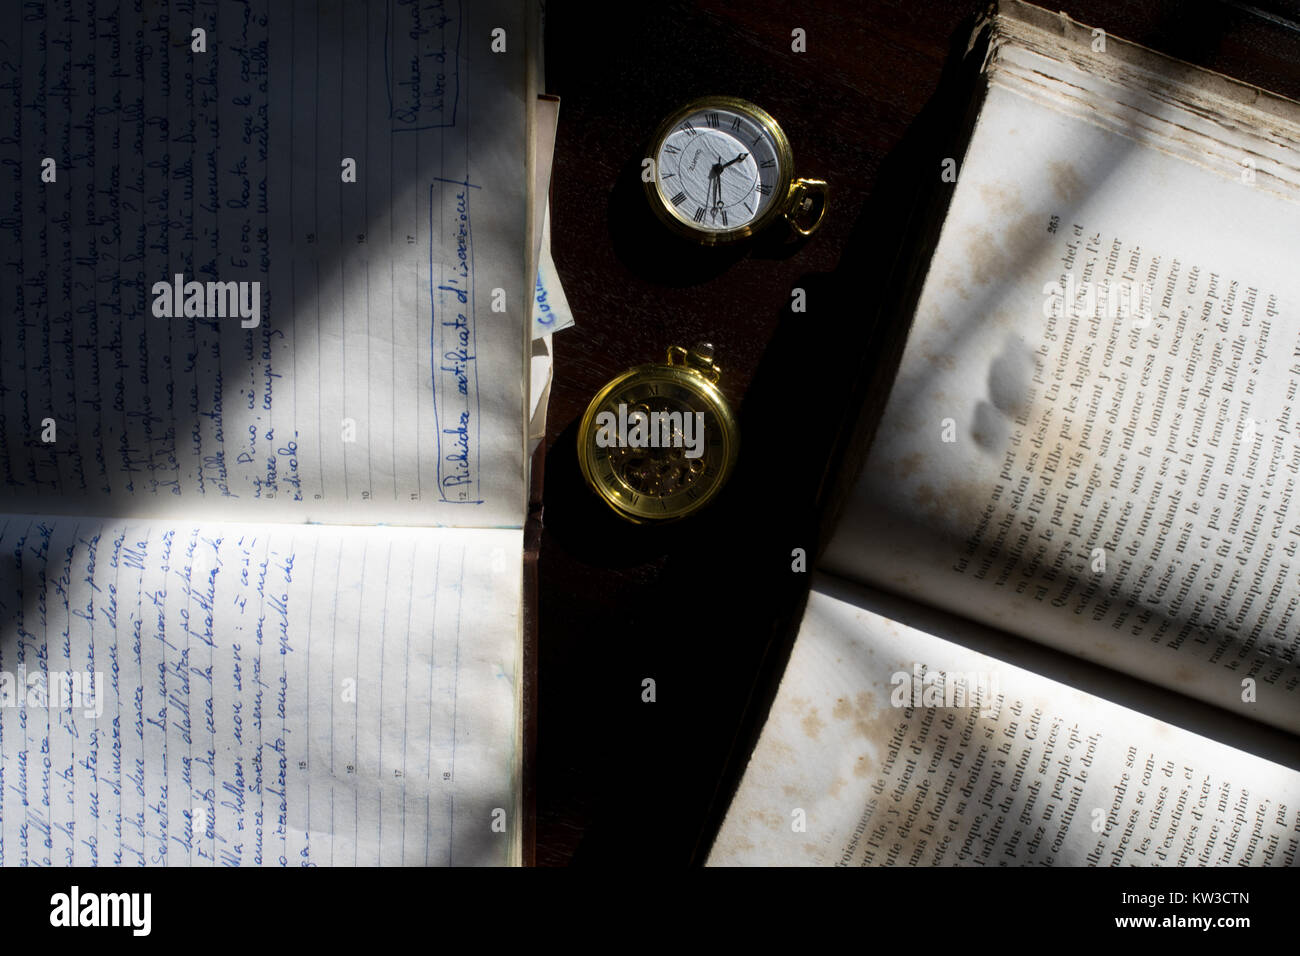 concept of past time with old manuscripts and pocket watches Stock Photo